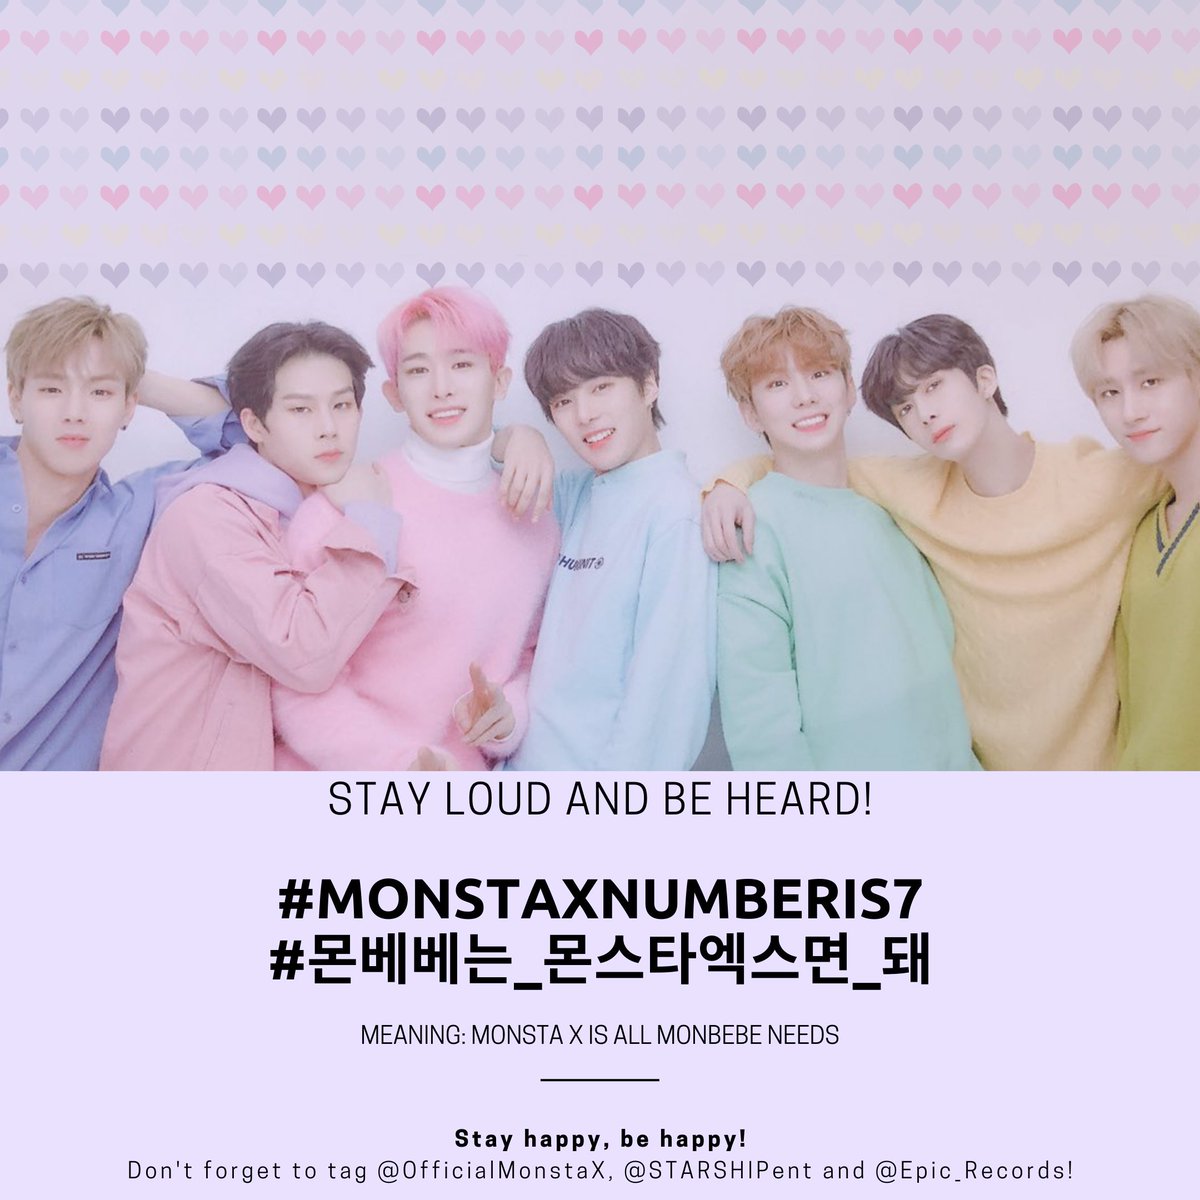 2020022212am KST onwards208th Hashtags @OfficialMonstaX @STARSHIPent  @Epic_Records  #MonstaXNumberIs7  #몬베베는_몬스타엑스면_돼 408 official protest Hashtags